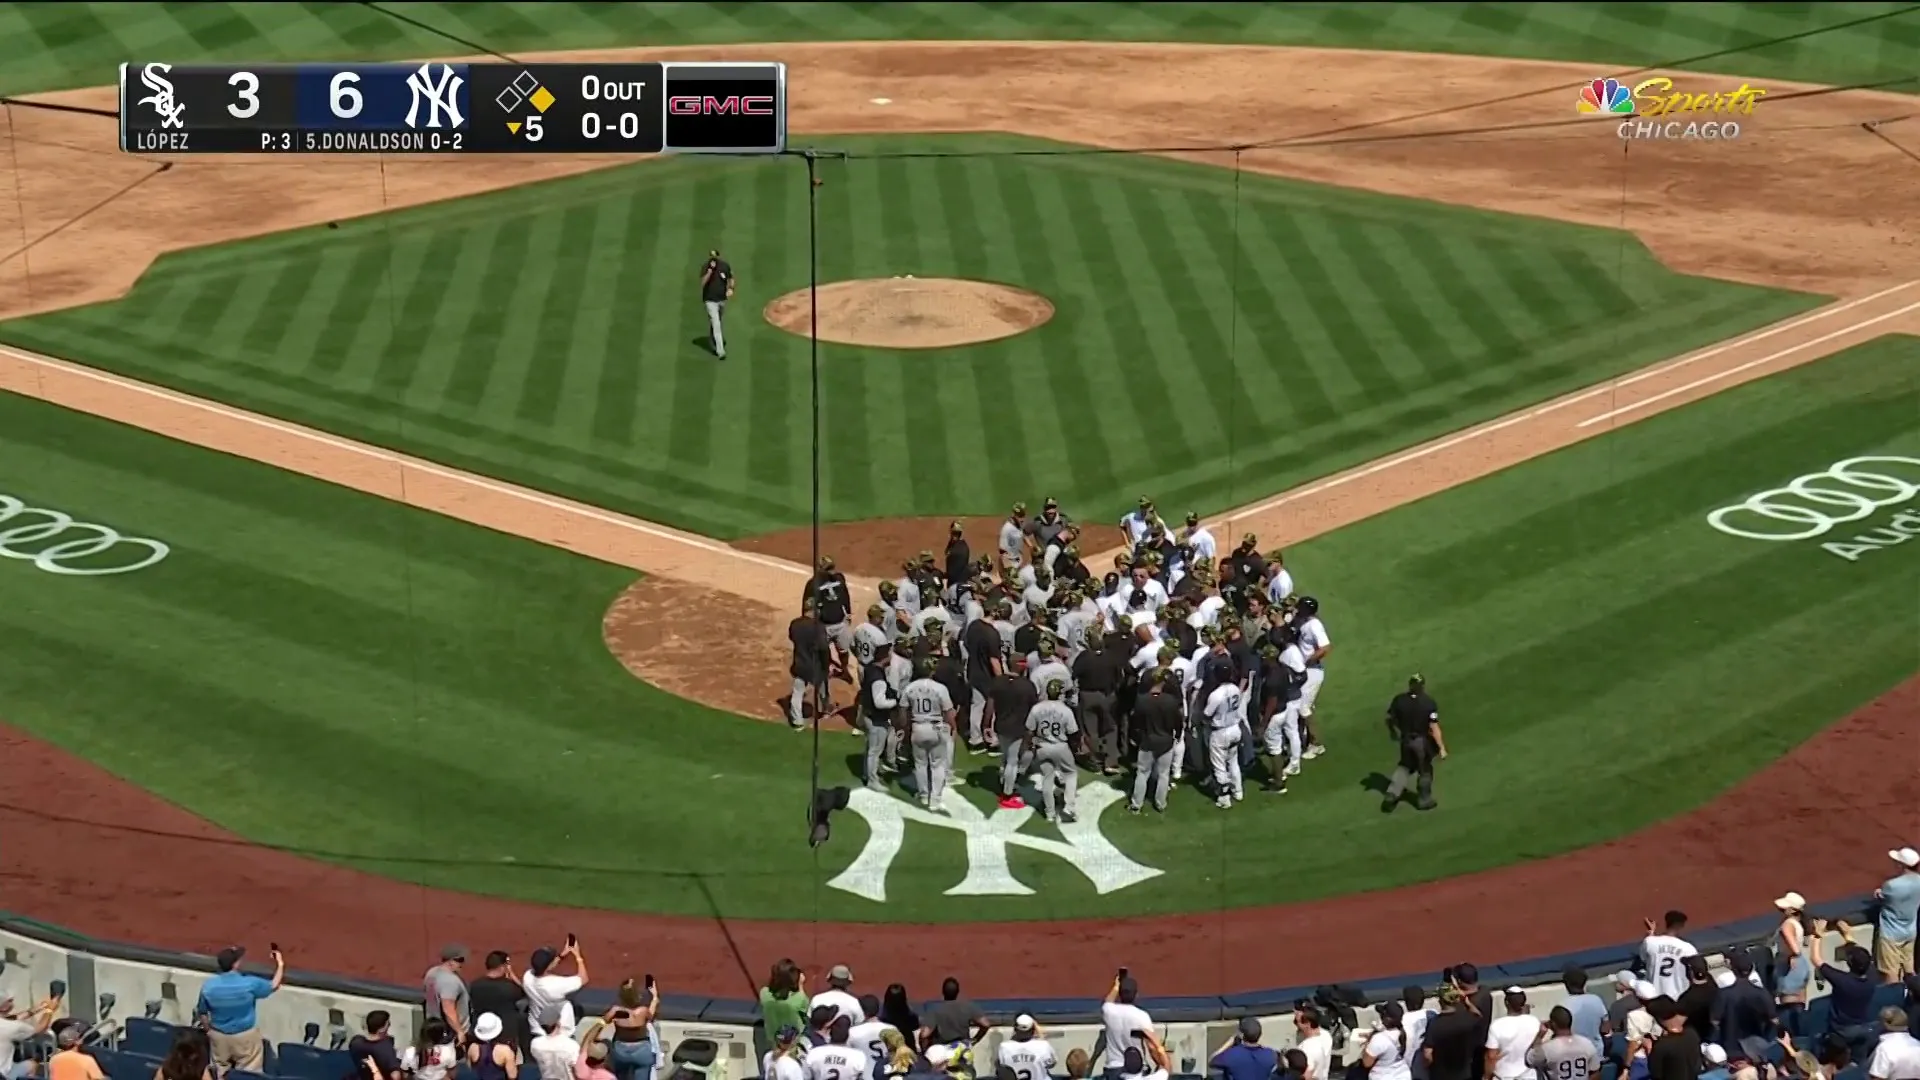 New York Yankees, Chicago White Sox Benches Clear at Yankee